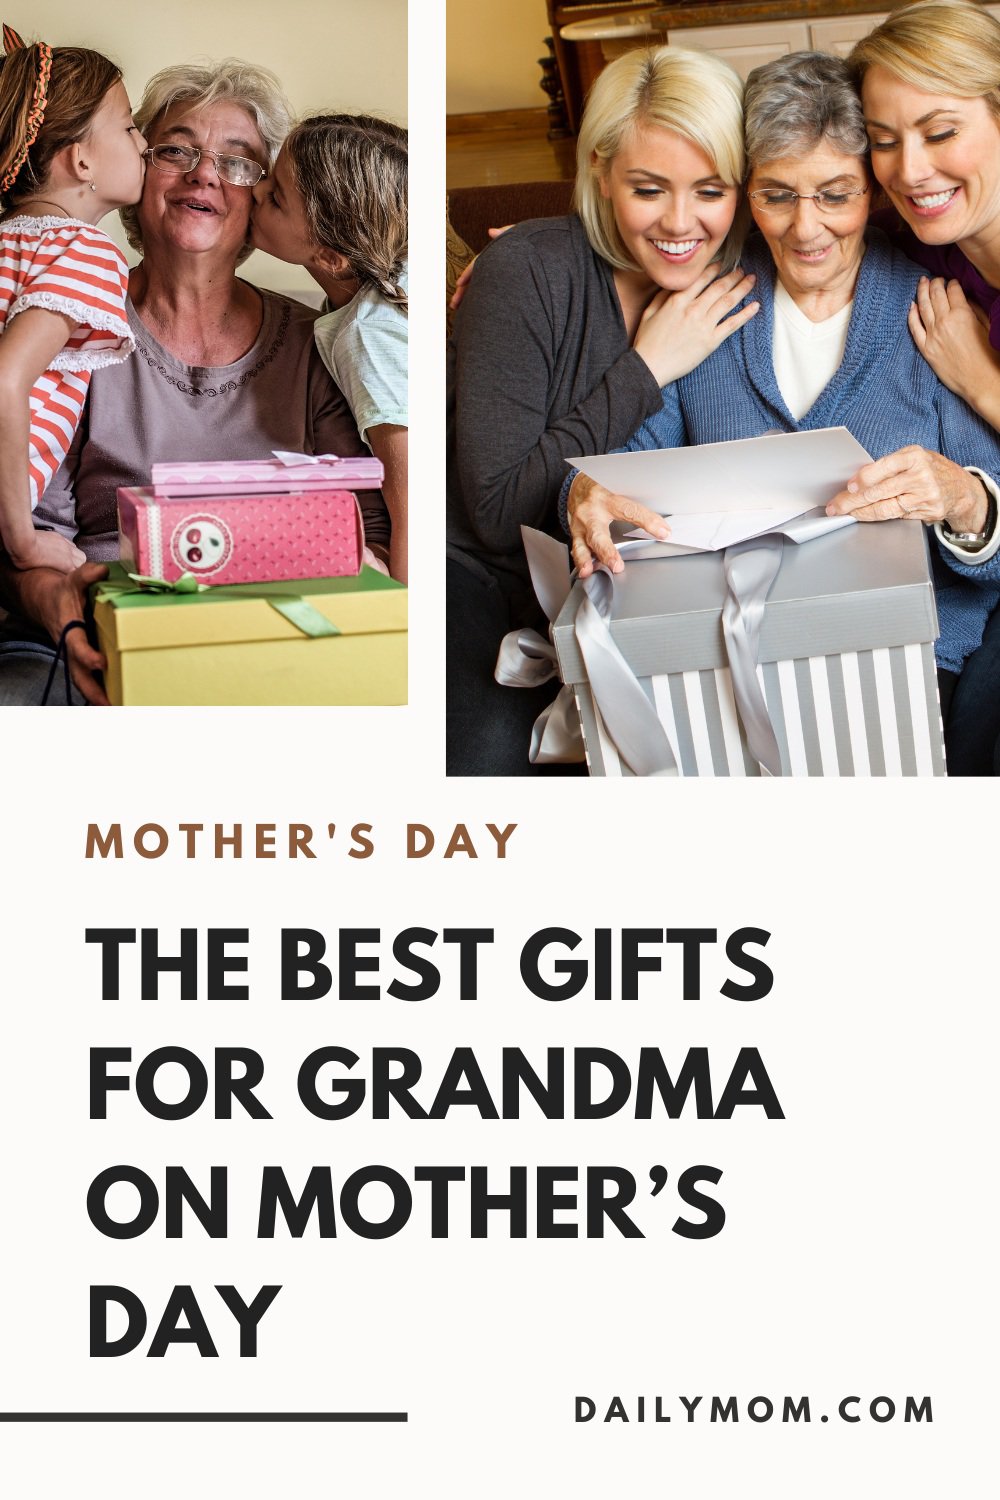 23 Of The Best Gifts For Grandma On Mother's Day